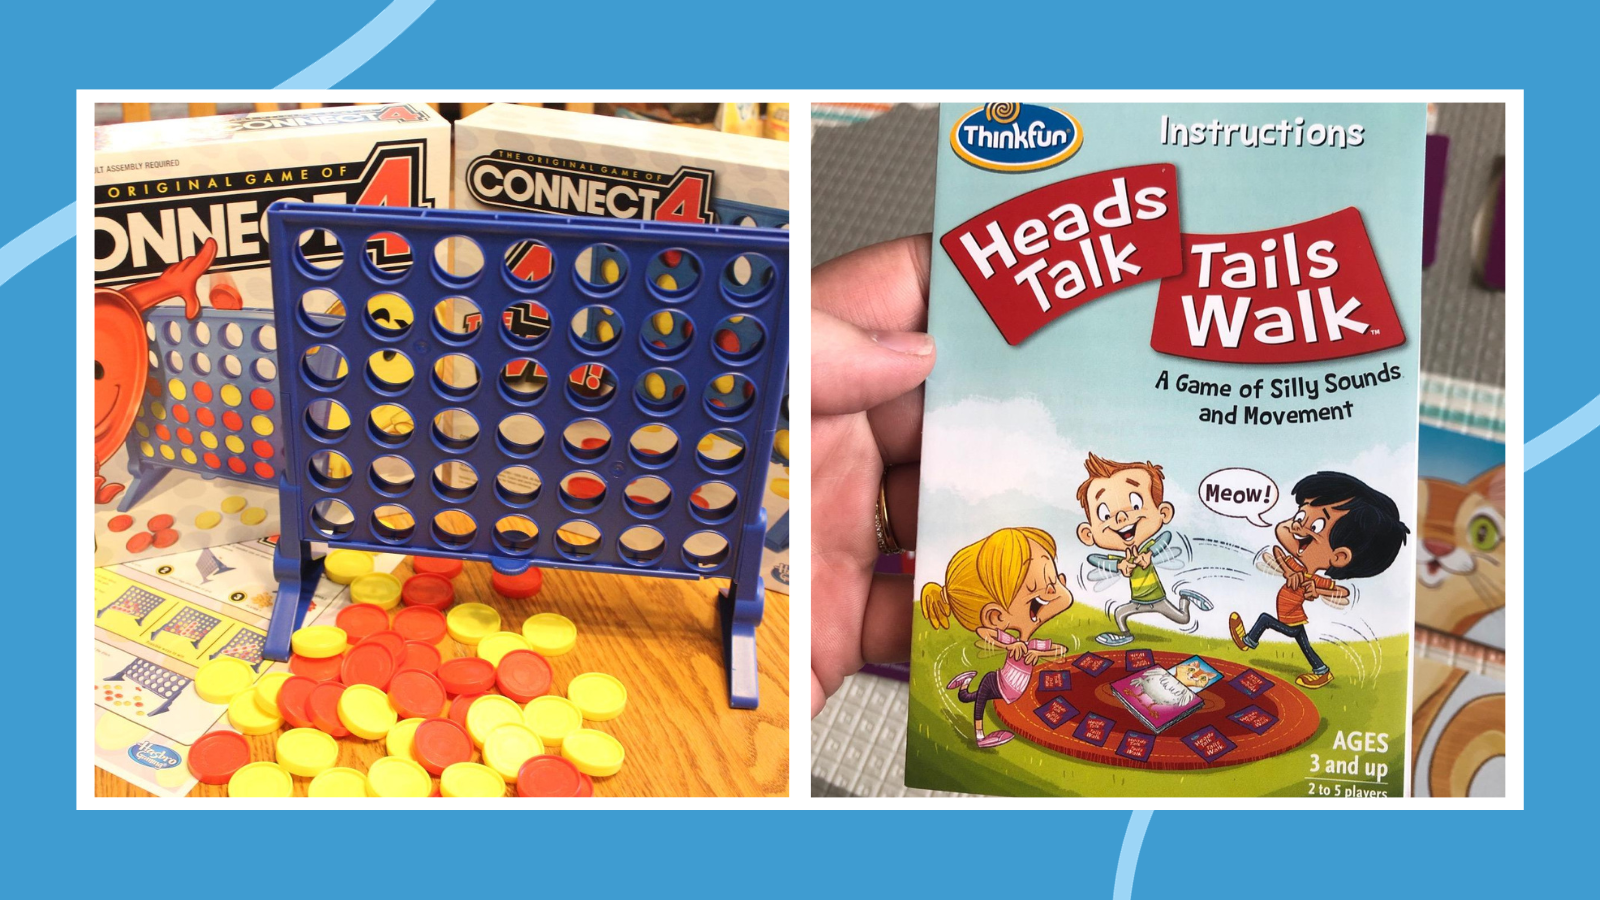 Examples of preschool games including Connect for and Heads Talk, Tails Walk